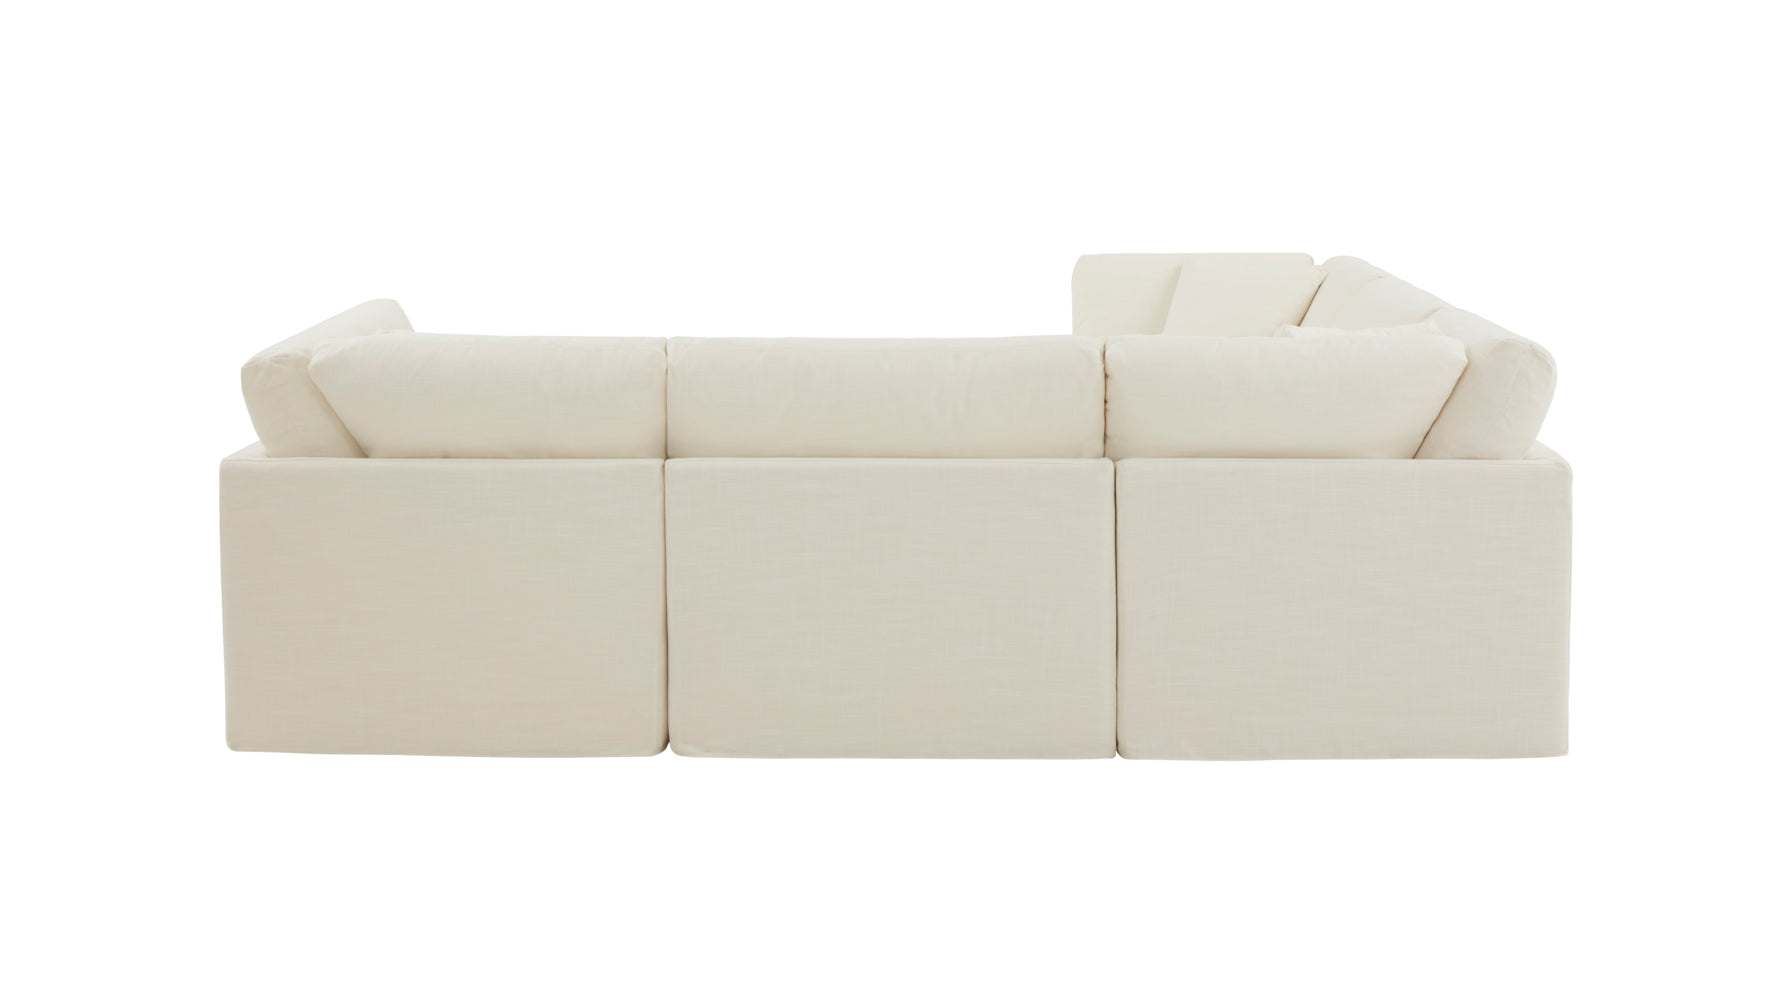 Get Together™ 5-Piece Modular Sectional Closed, Standard, Cream Linen - Image 8